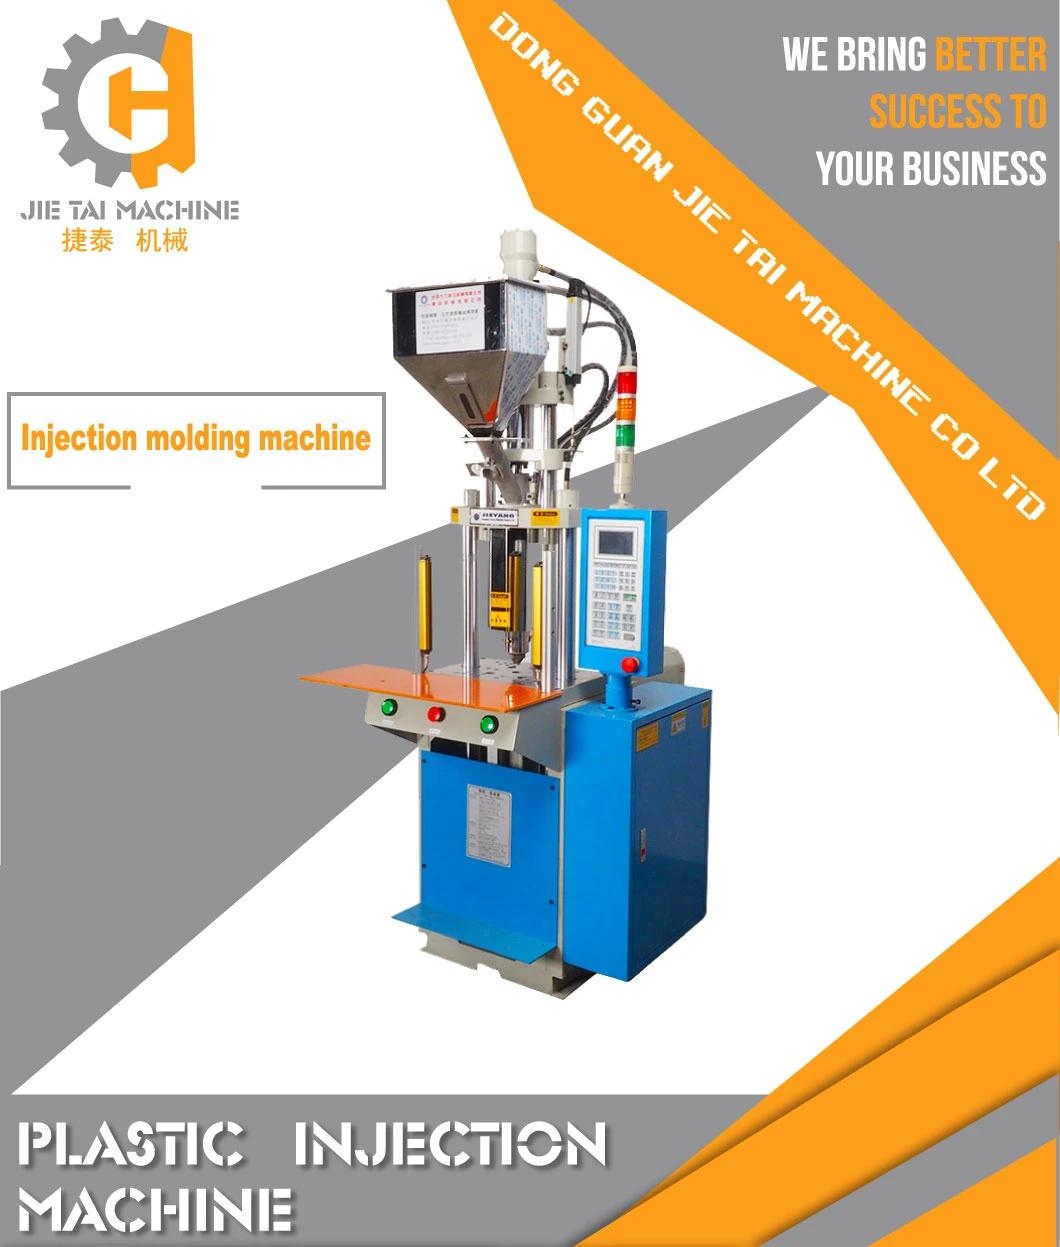 Hand Operating Injection Molding Machine Supplier Company and Exporter